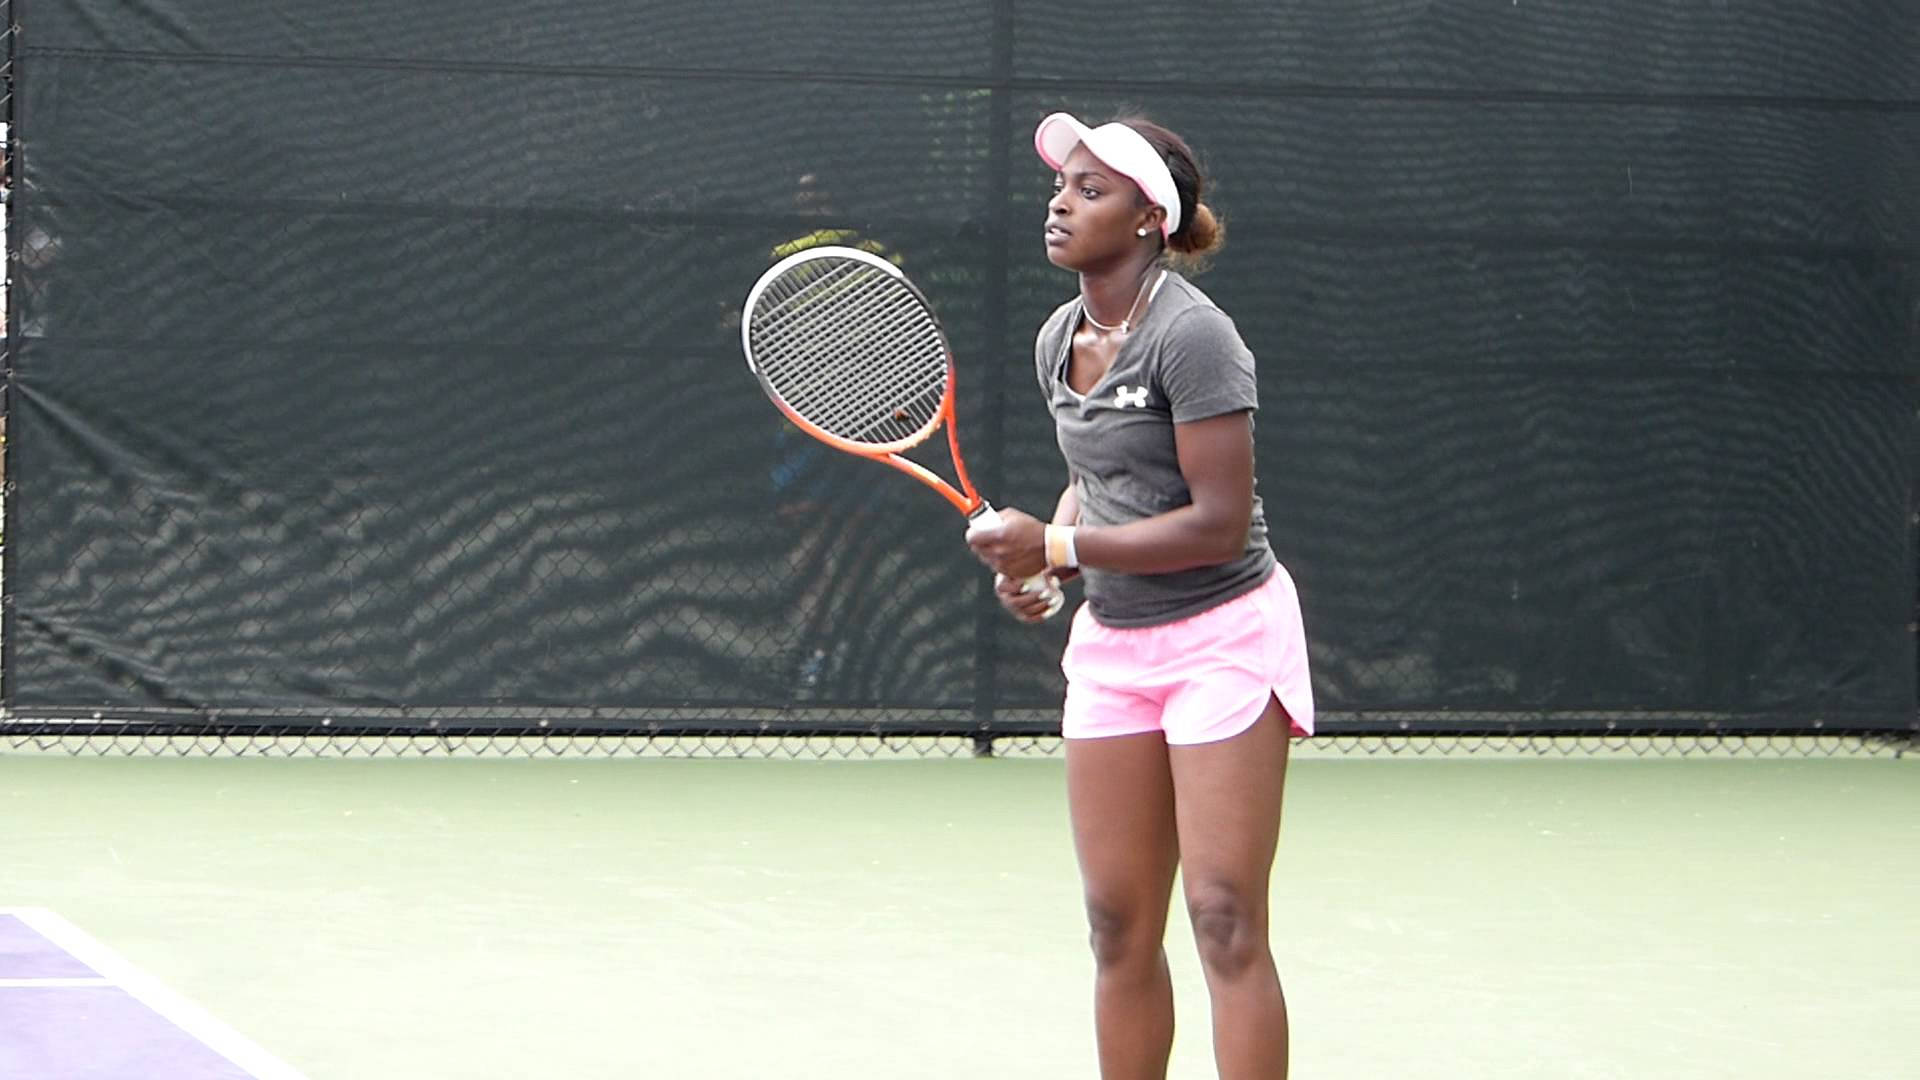 Sloane Stephens - Strength And Passion On The Court Background